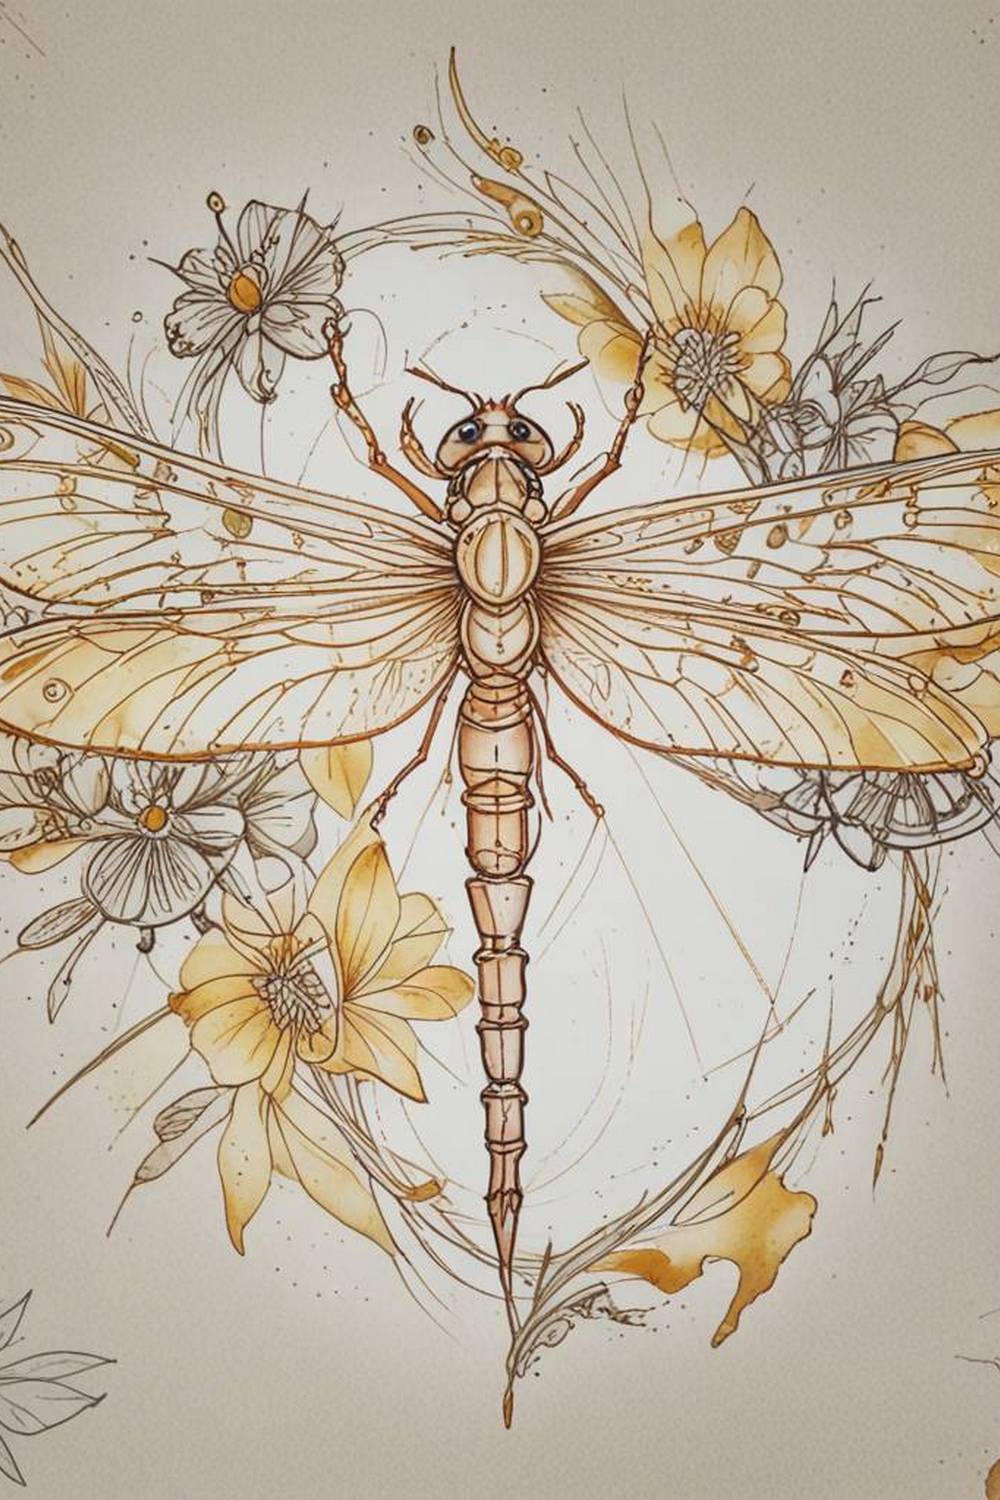 Tattoo Set #10 SCETCHES – Insects 53 sketches pinterest preview image.